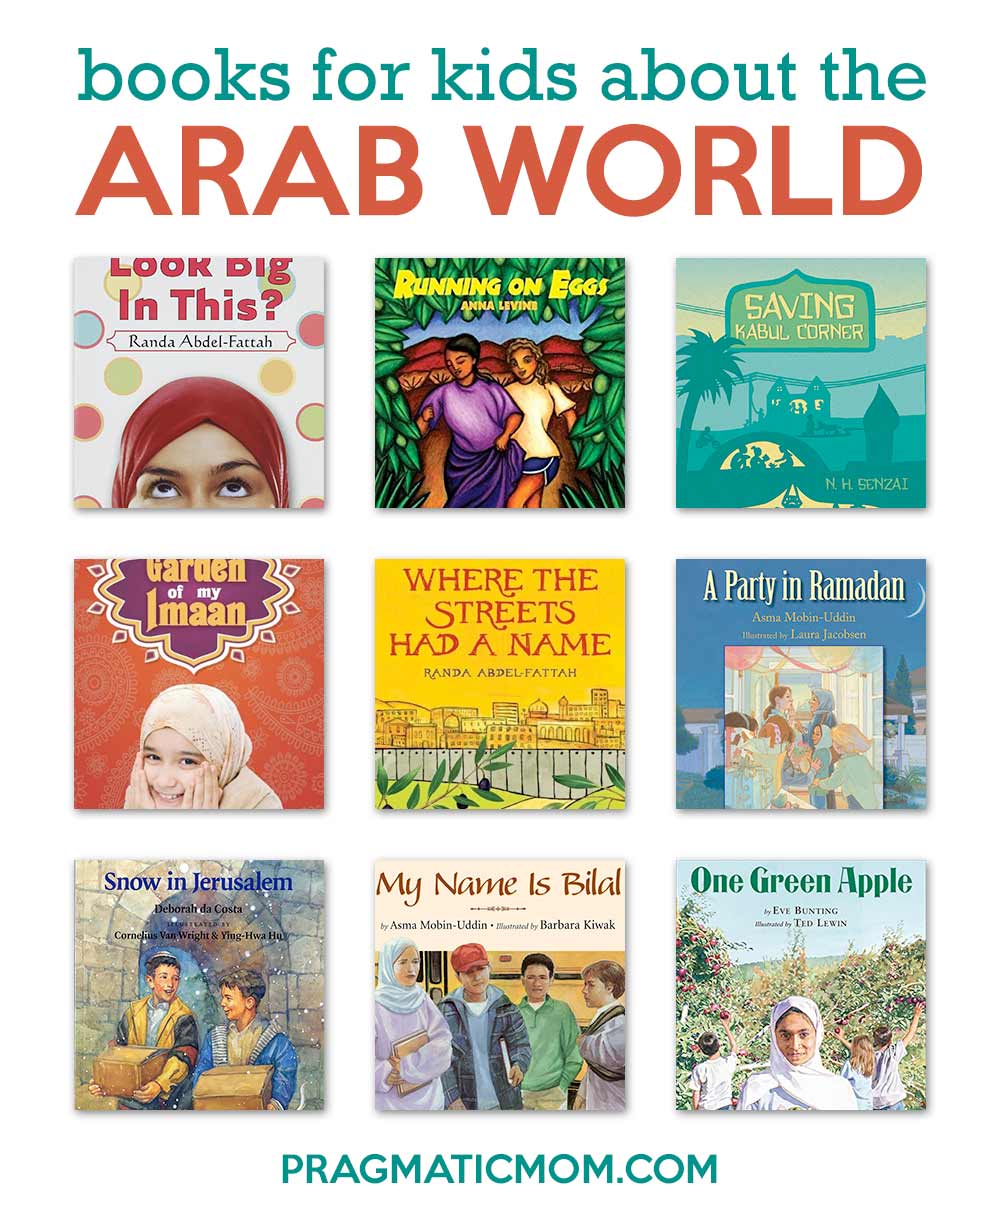 17 Great Books for Teens on the Arab World